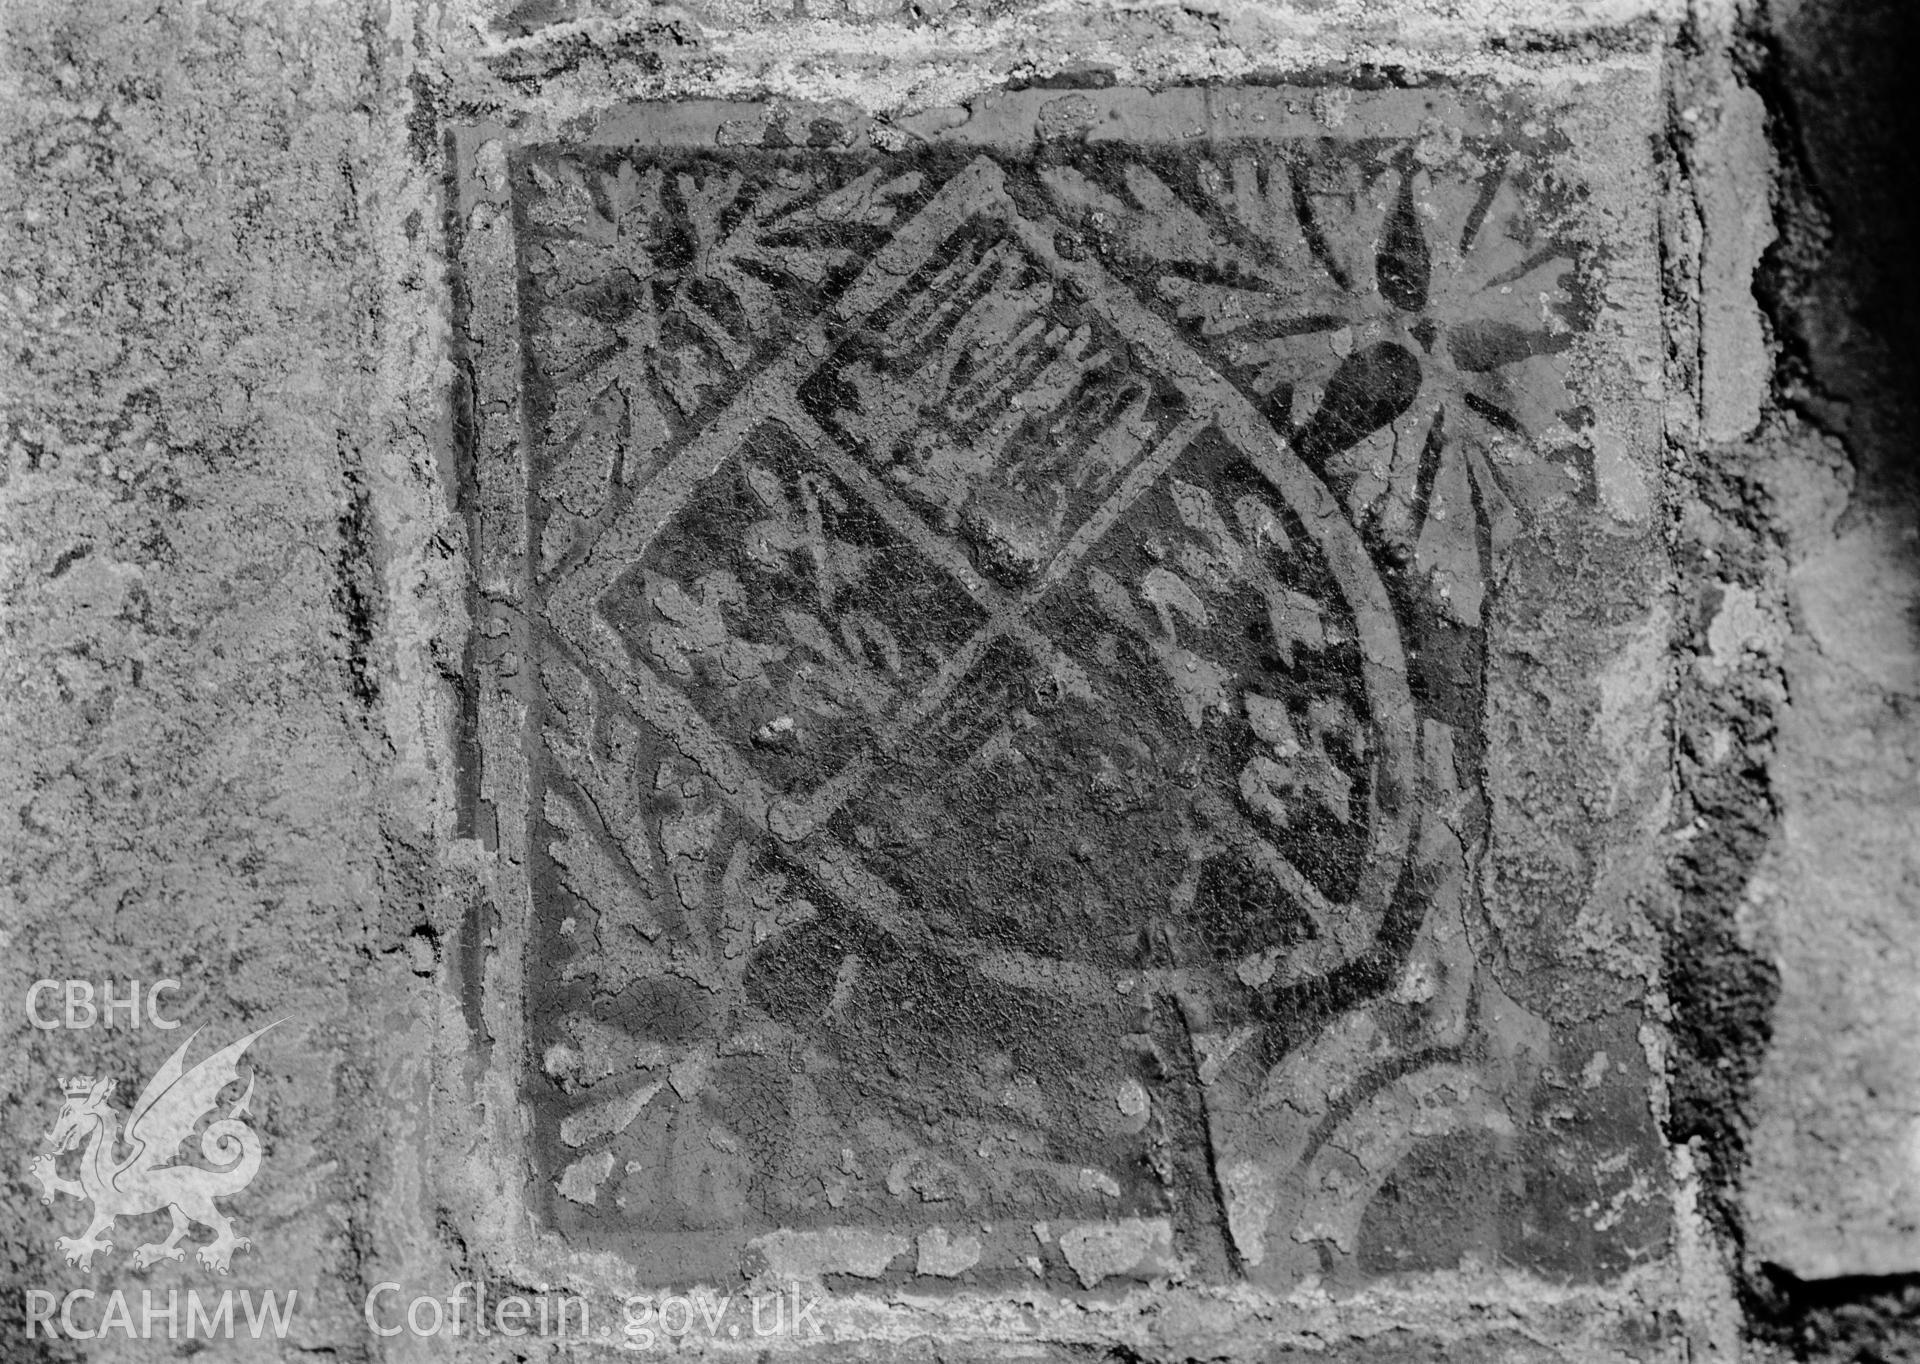 View of a patterned floor tile from Monmouth Church, taken by Clayton.